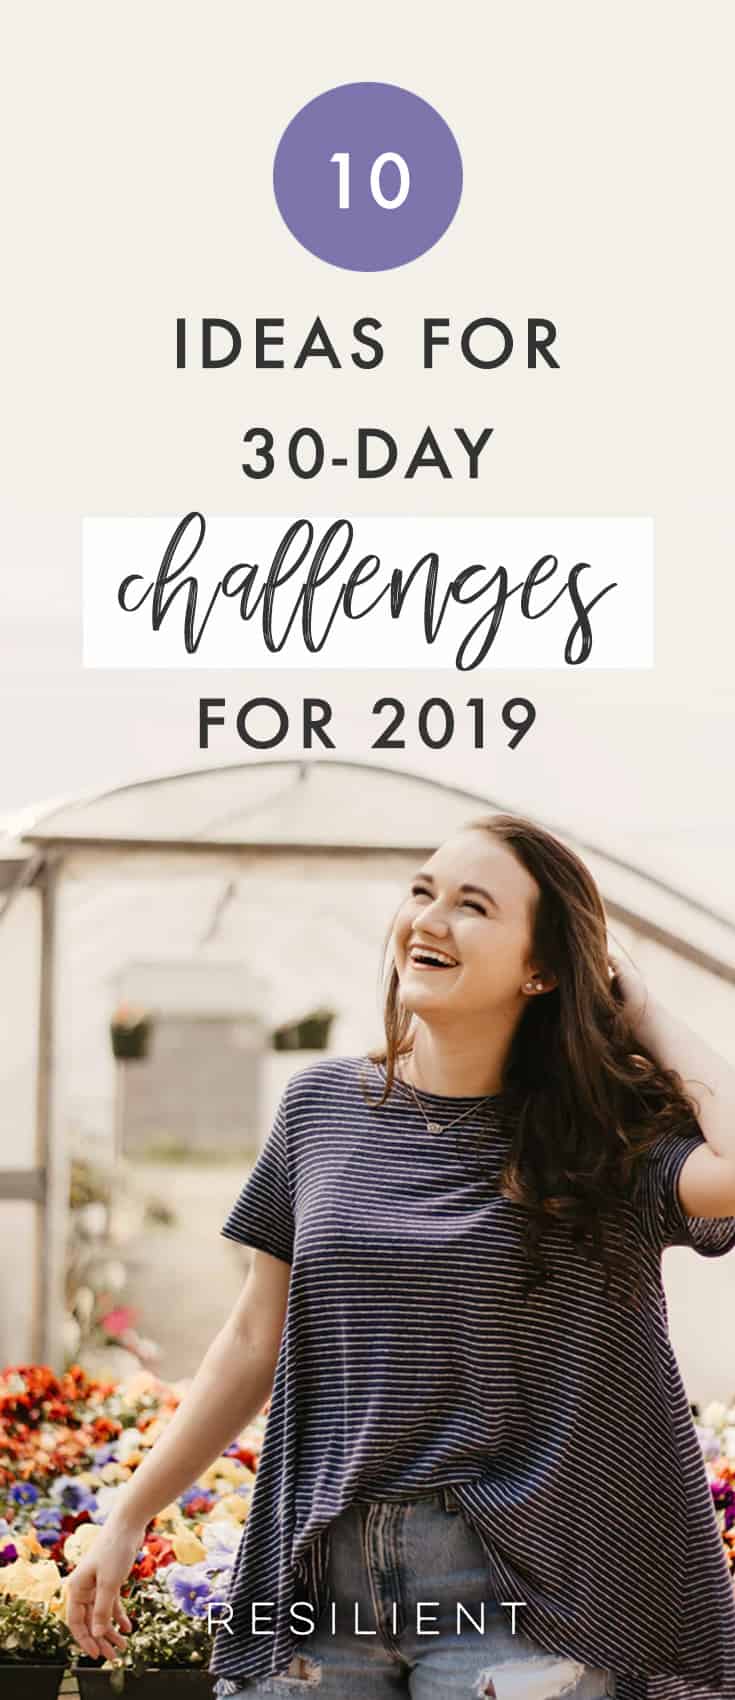 You can accomplish a lot in just 30 days, and based on some studies, you can form a new habit too. There are lots of ways to change your life, and a fun way to kickstart the changes is with a 30 day challenge. Here are 10 ideas for 30 day challenges.